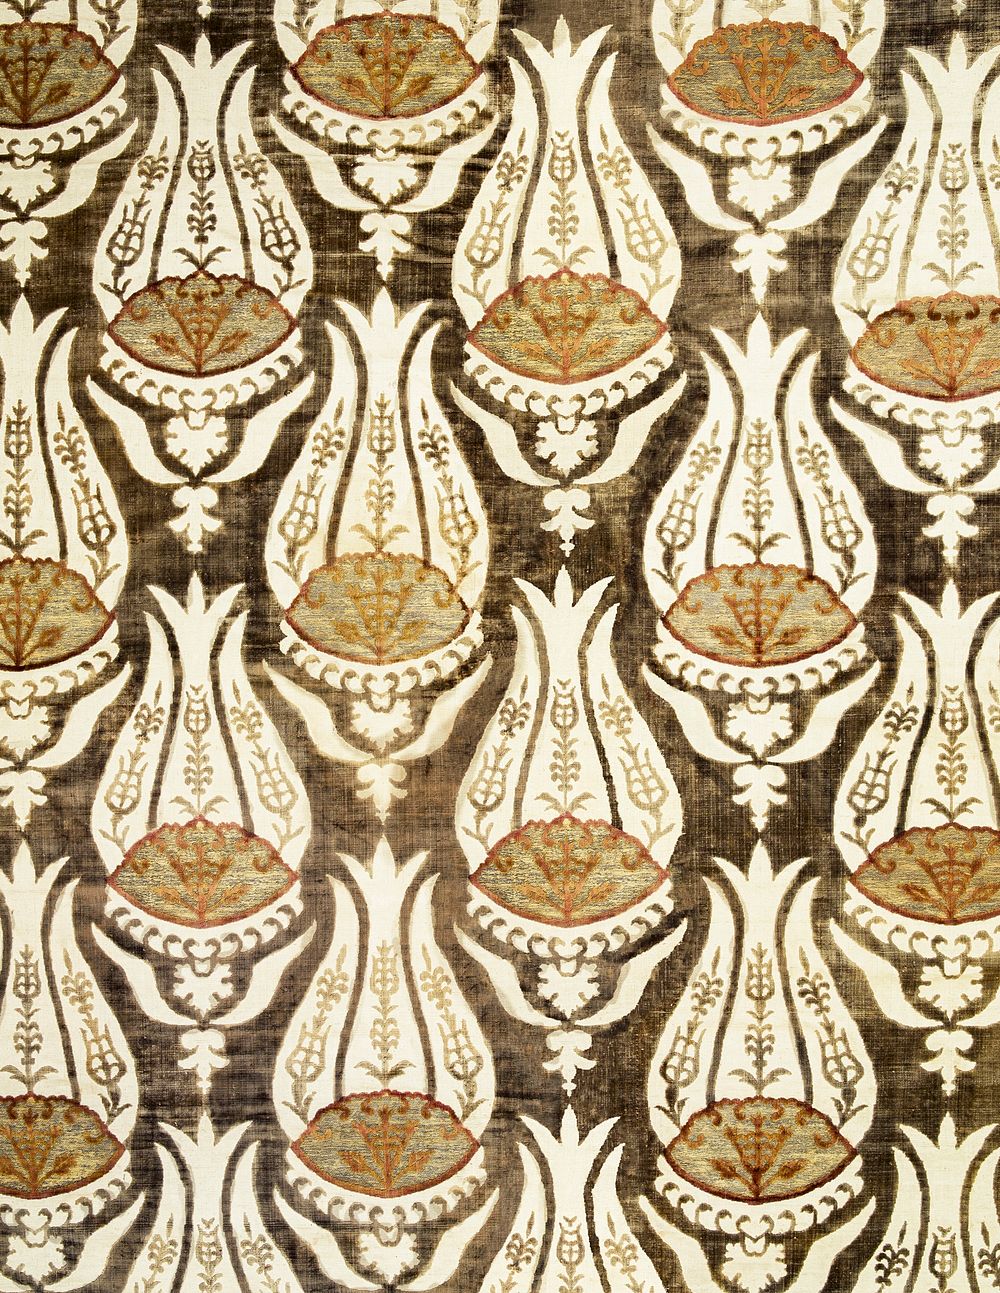 William Morris's (1834-1896) Furnishing fabric famous pattern. Original from The Birmingham Museum. Digitally enhanced by…